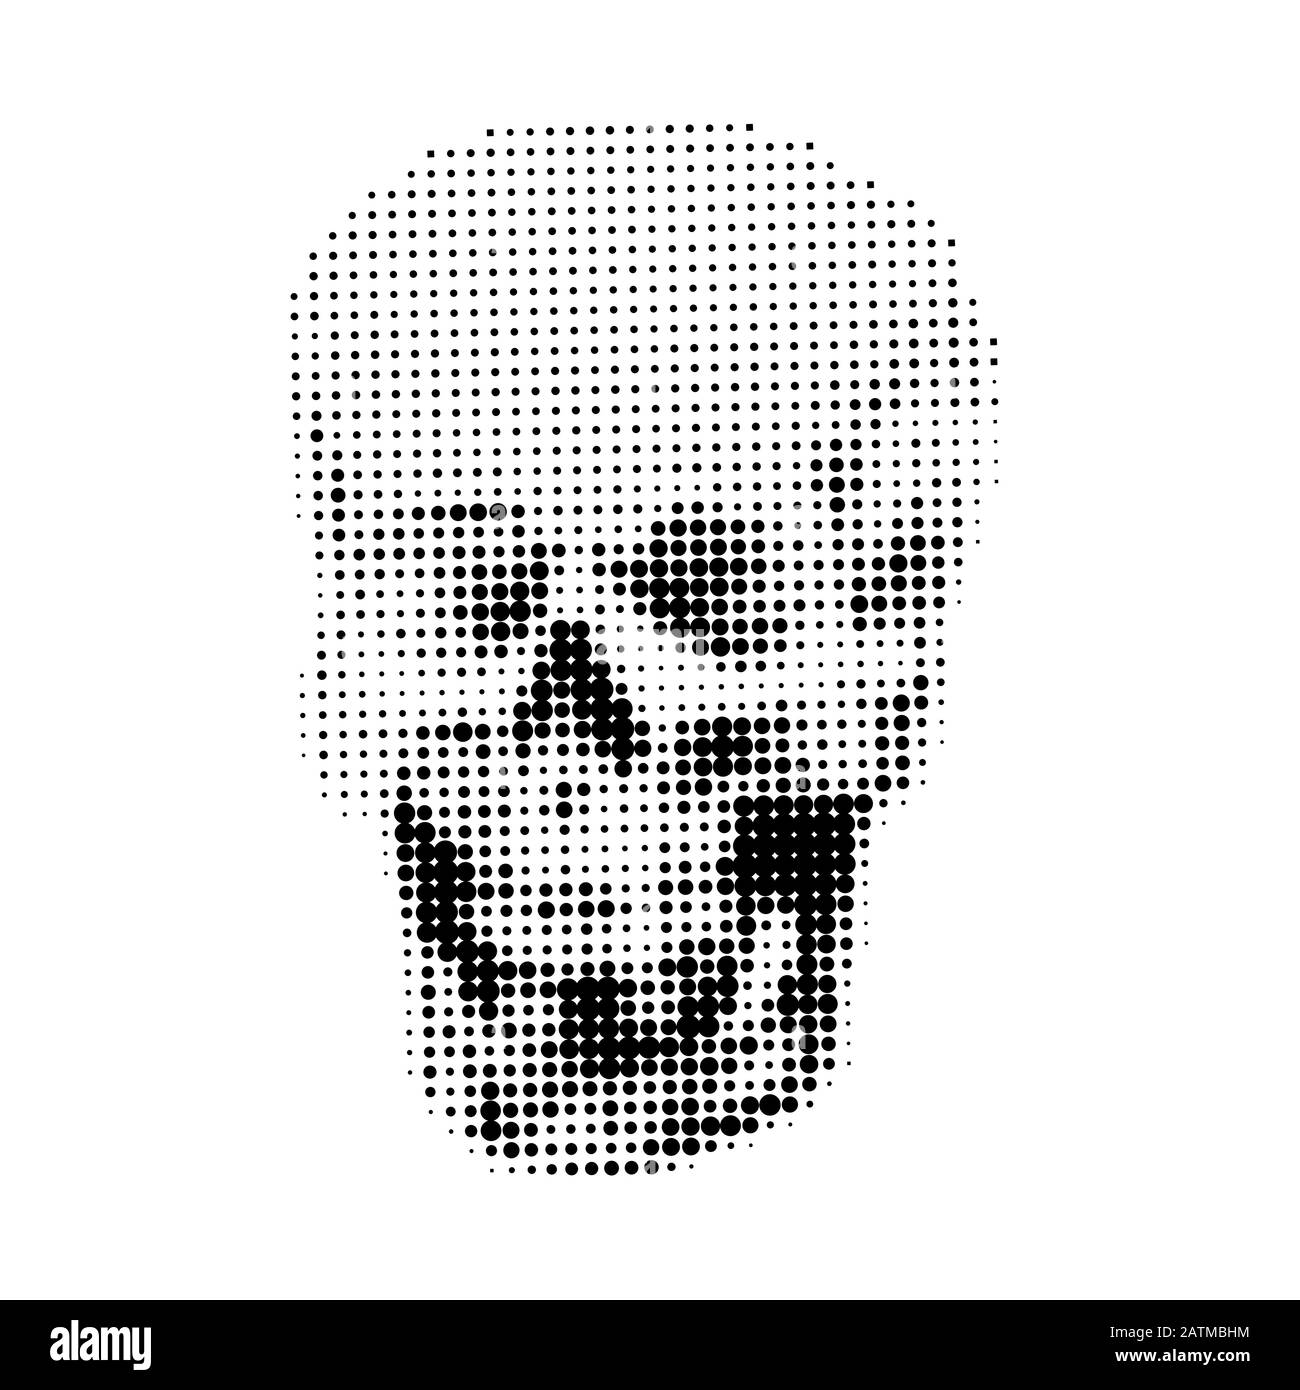 Human skull on white background. Vector halftone effect. Simple illustration for death game message, danger, hacked computer. Stock Vector